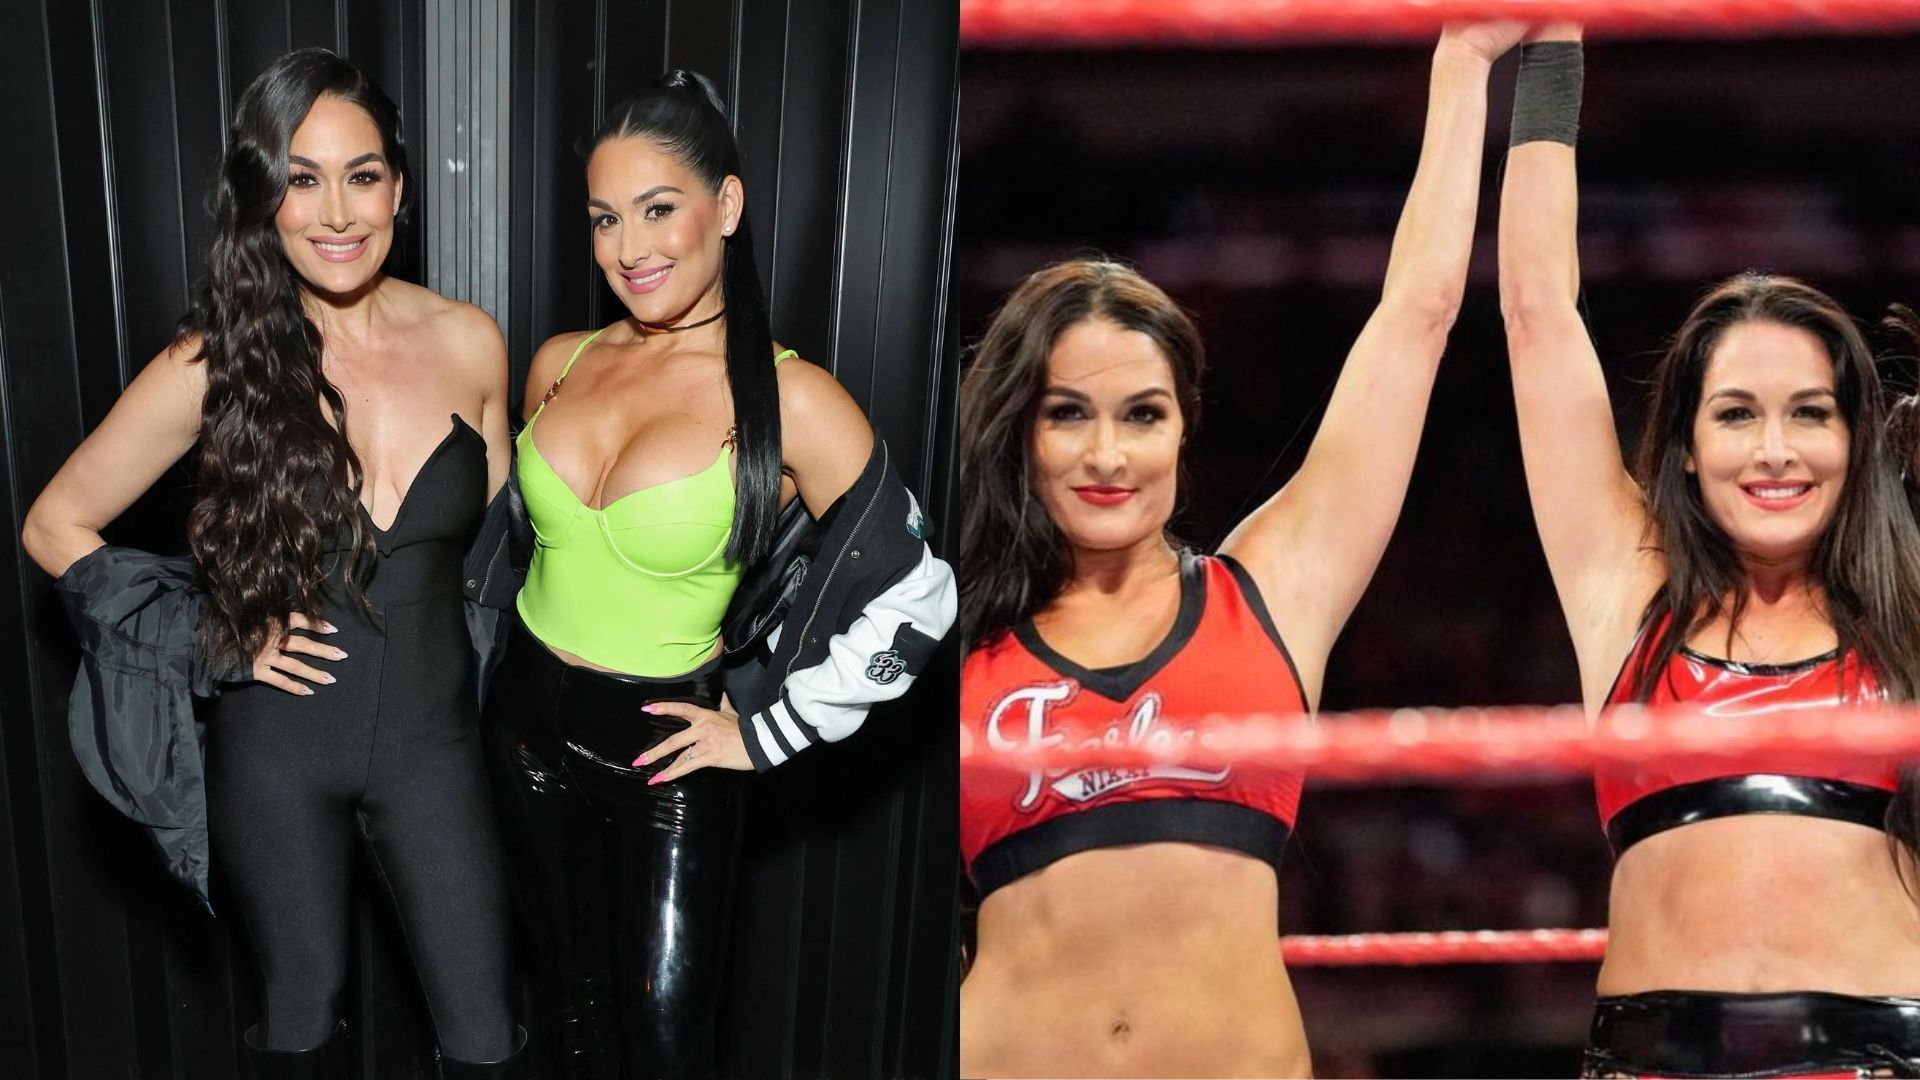 The Garcia Twins are former WWE Superstars